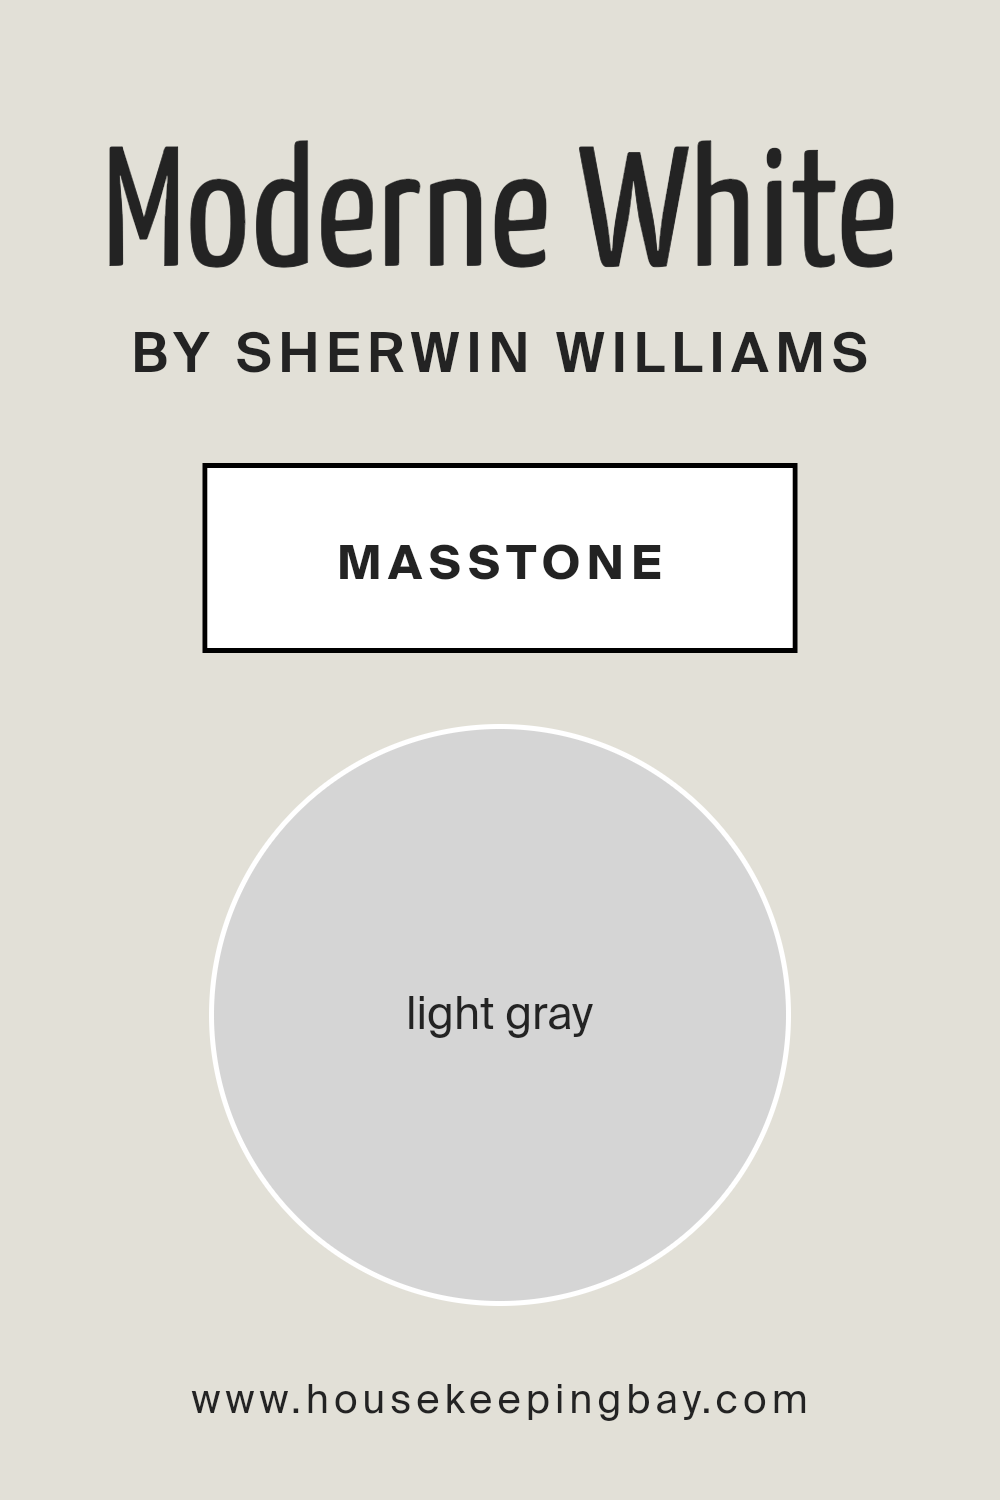 what_is_the_masstone_of_moderne_white_sw_6168